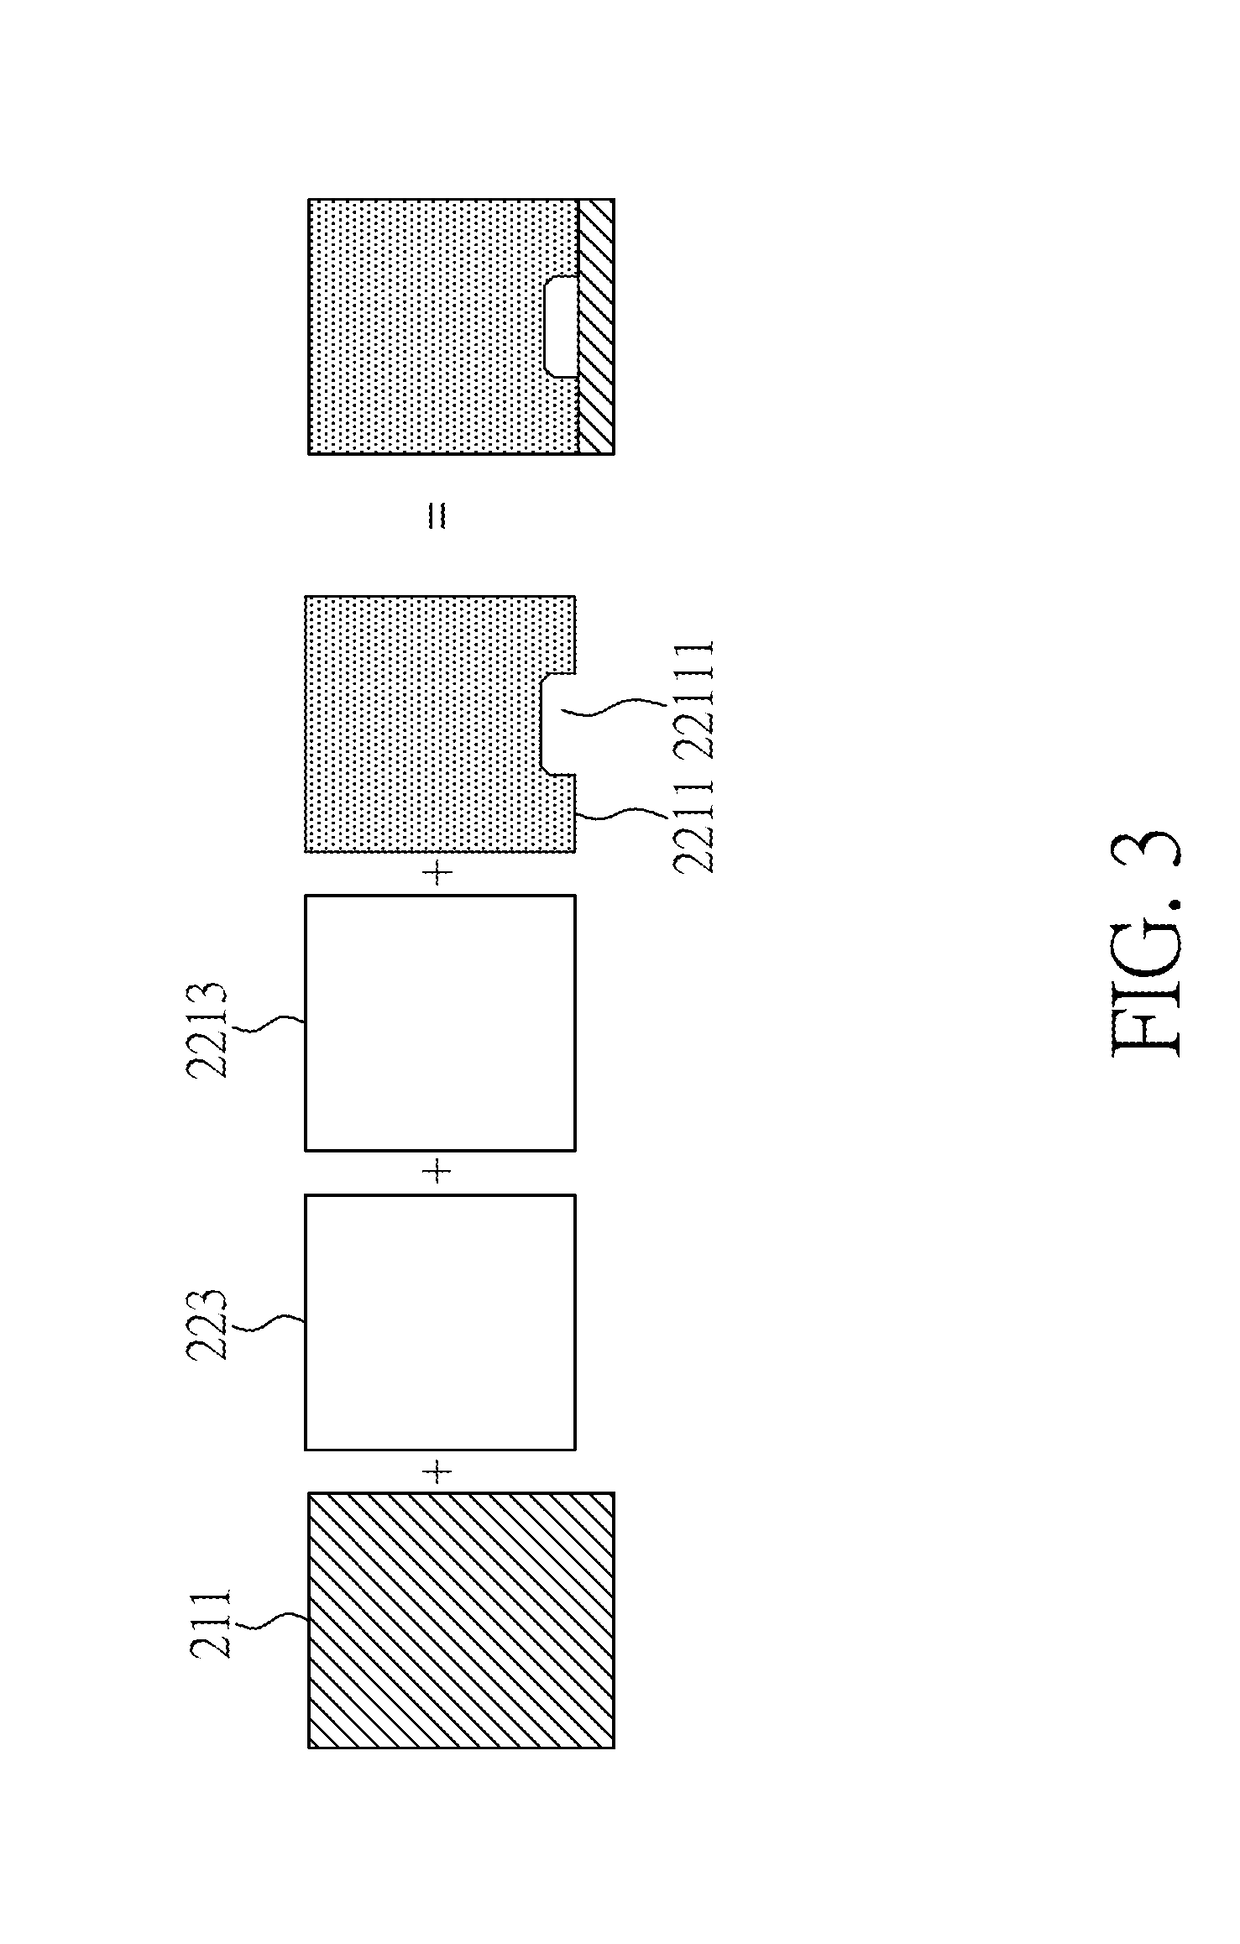 High screen ratio display device with fingerprint identification